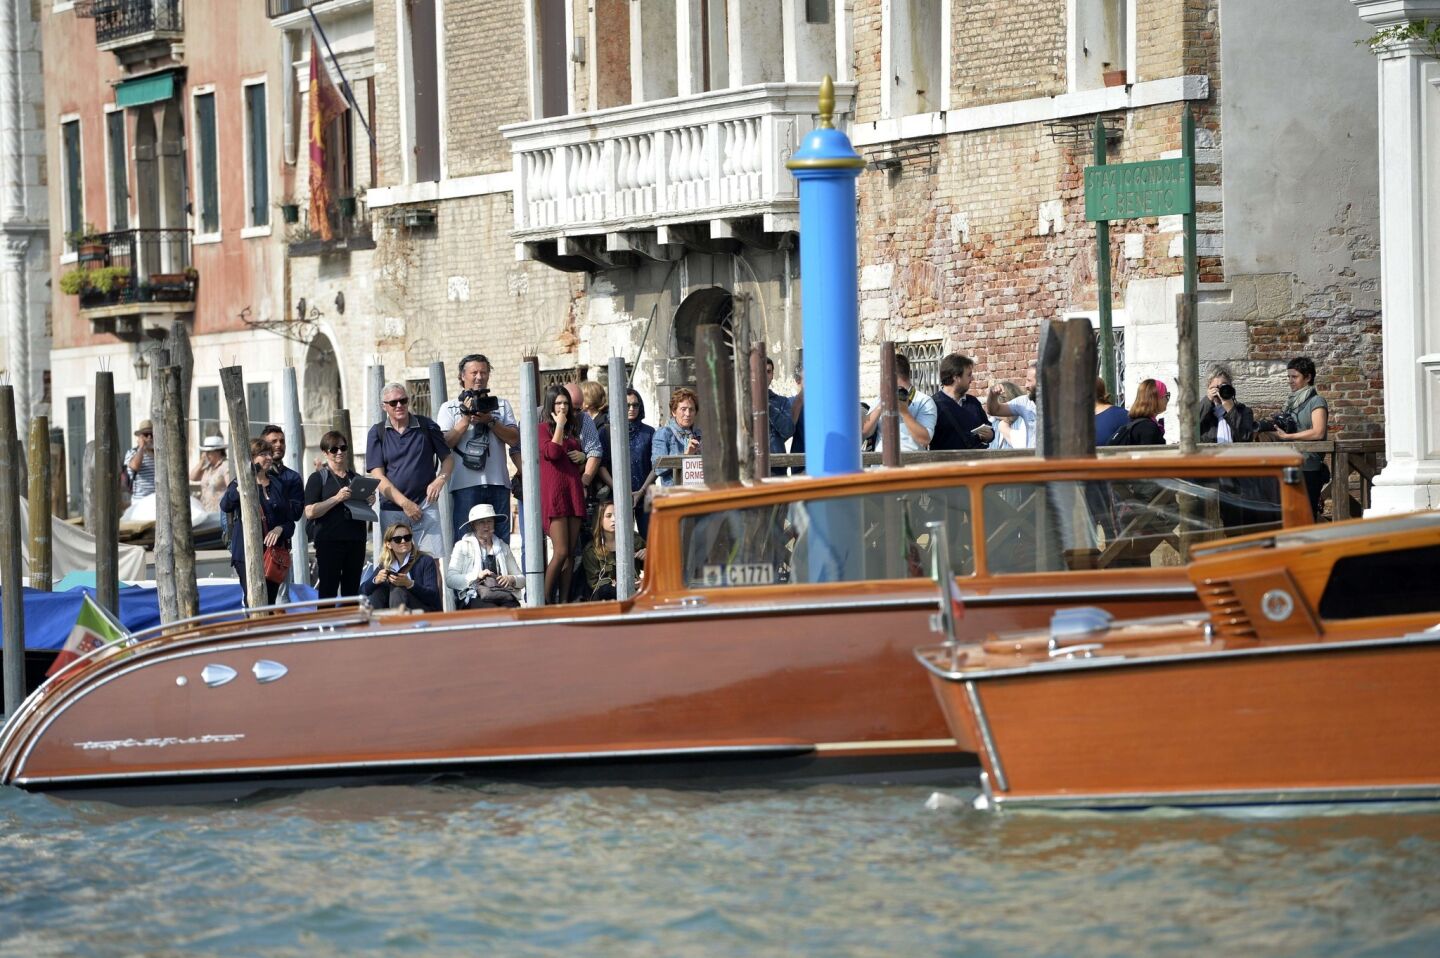 People and photographers wait near the Aman Canal Grande hotel, where London lawyer Amal Alamuddin was staying before her Saturday wedding to George Clooney.